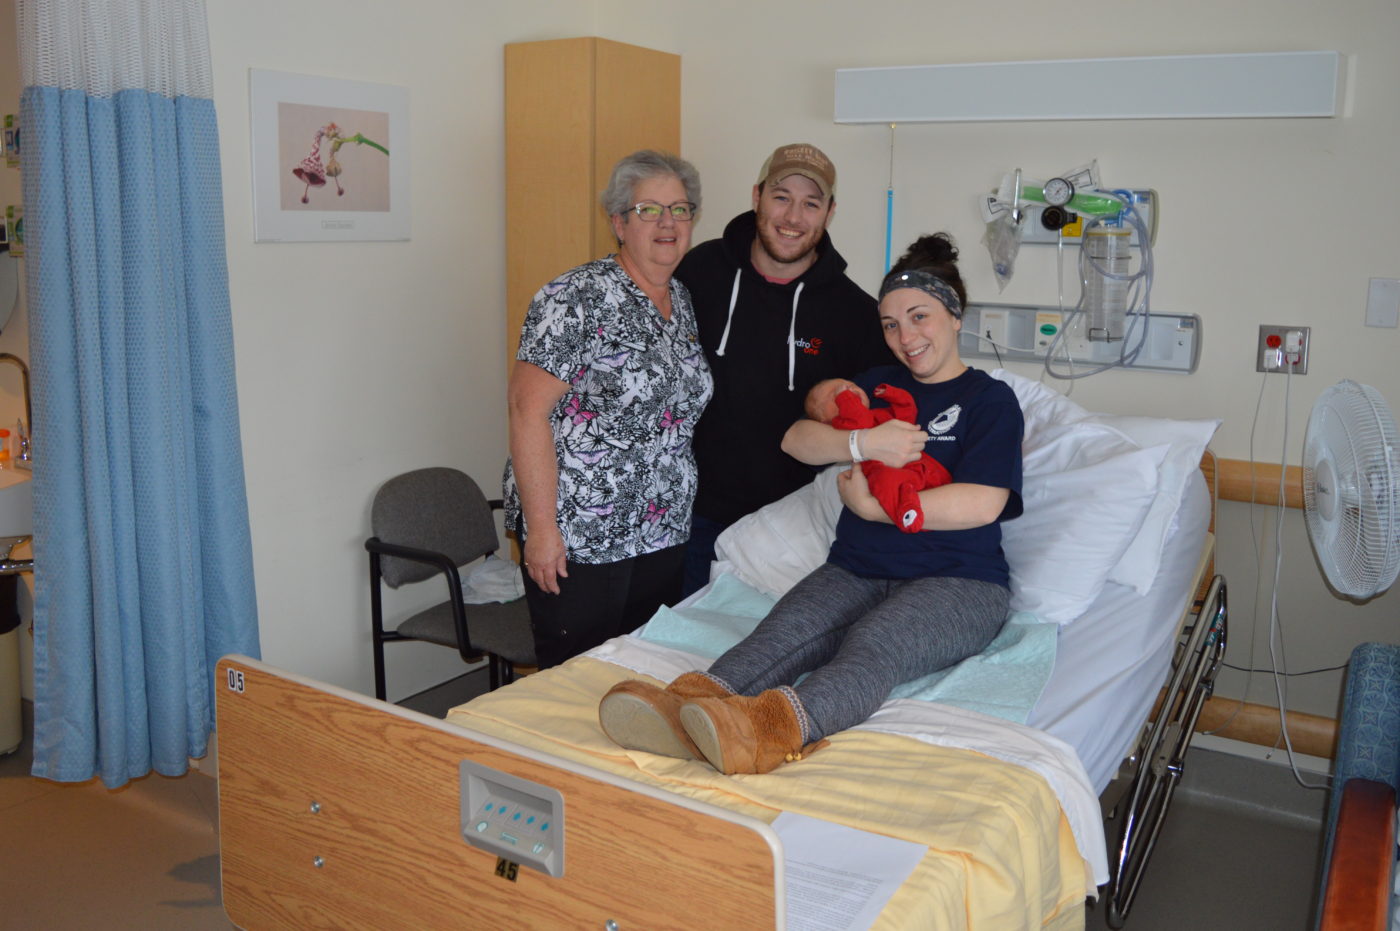 Donor Dollars well spent – new operating lights on the Obstetrical Unit